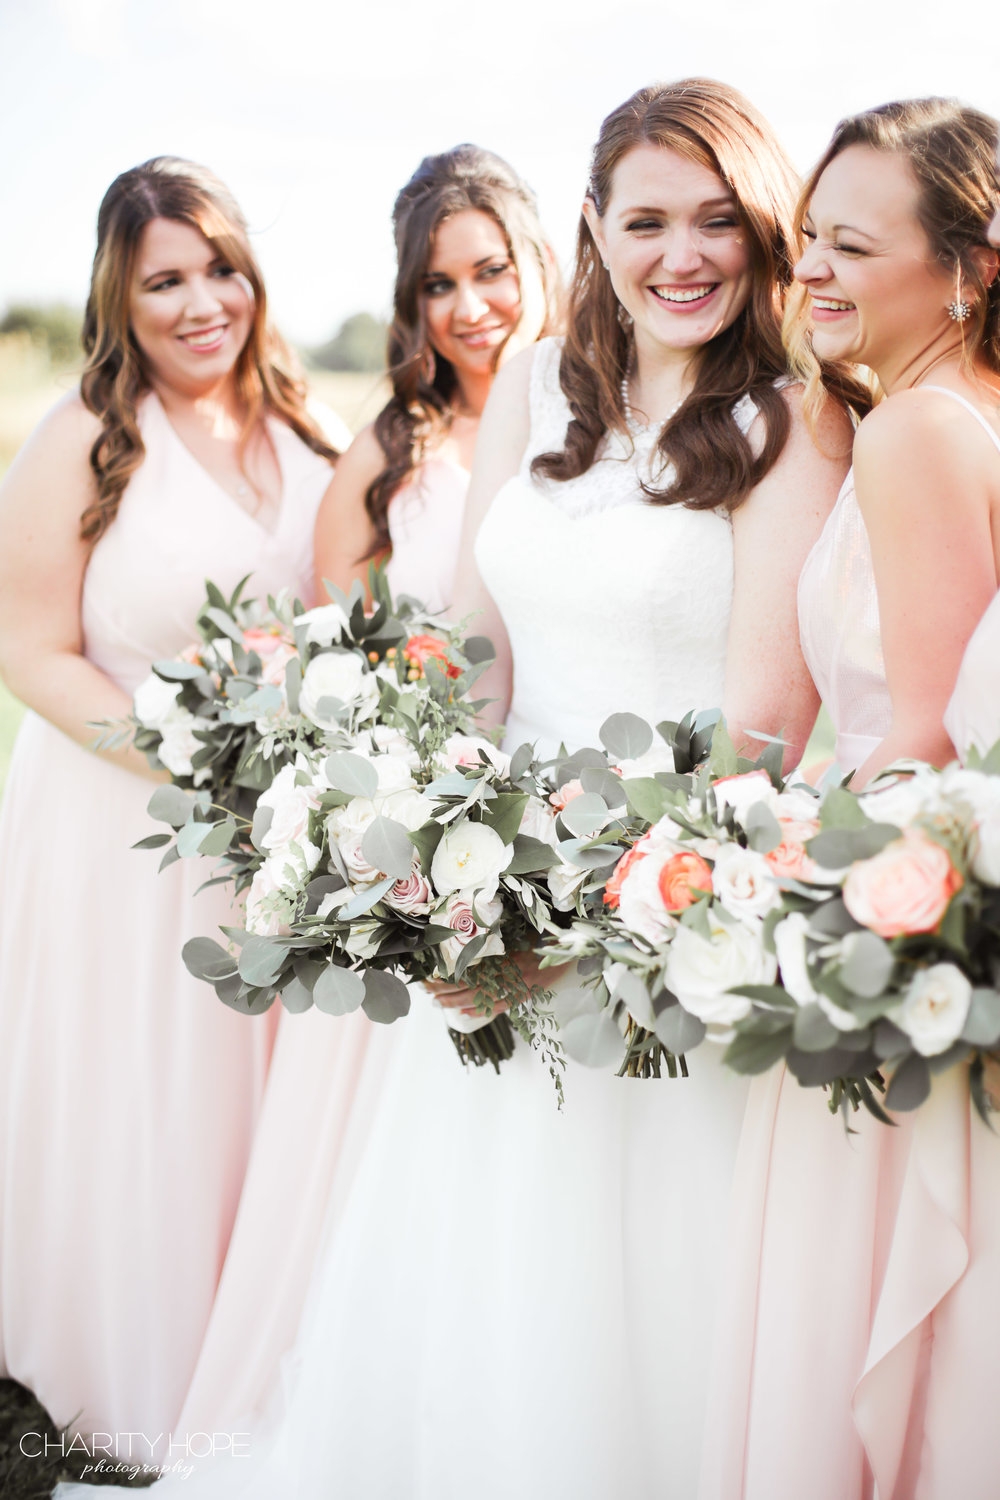  Liz with her beautiful bridesmaids!!! Sayleslivingston Design did NOT disappoint on the bouquets! 💕 